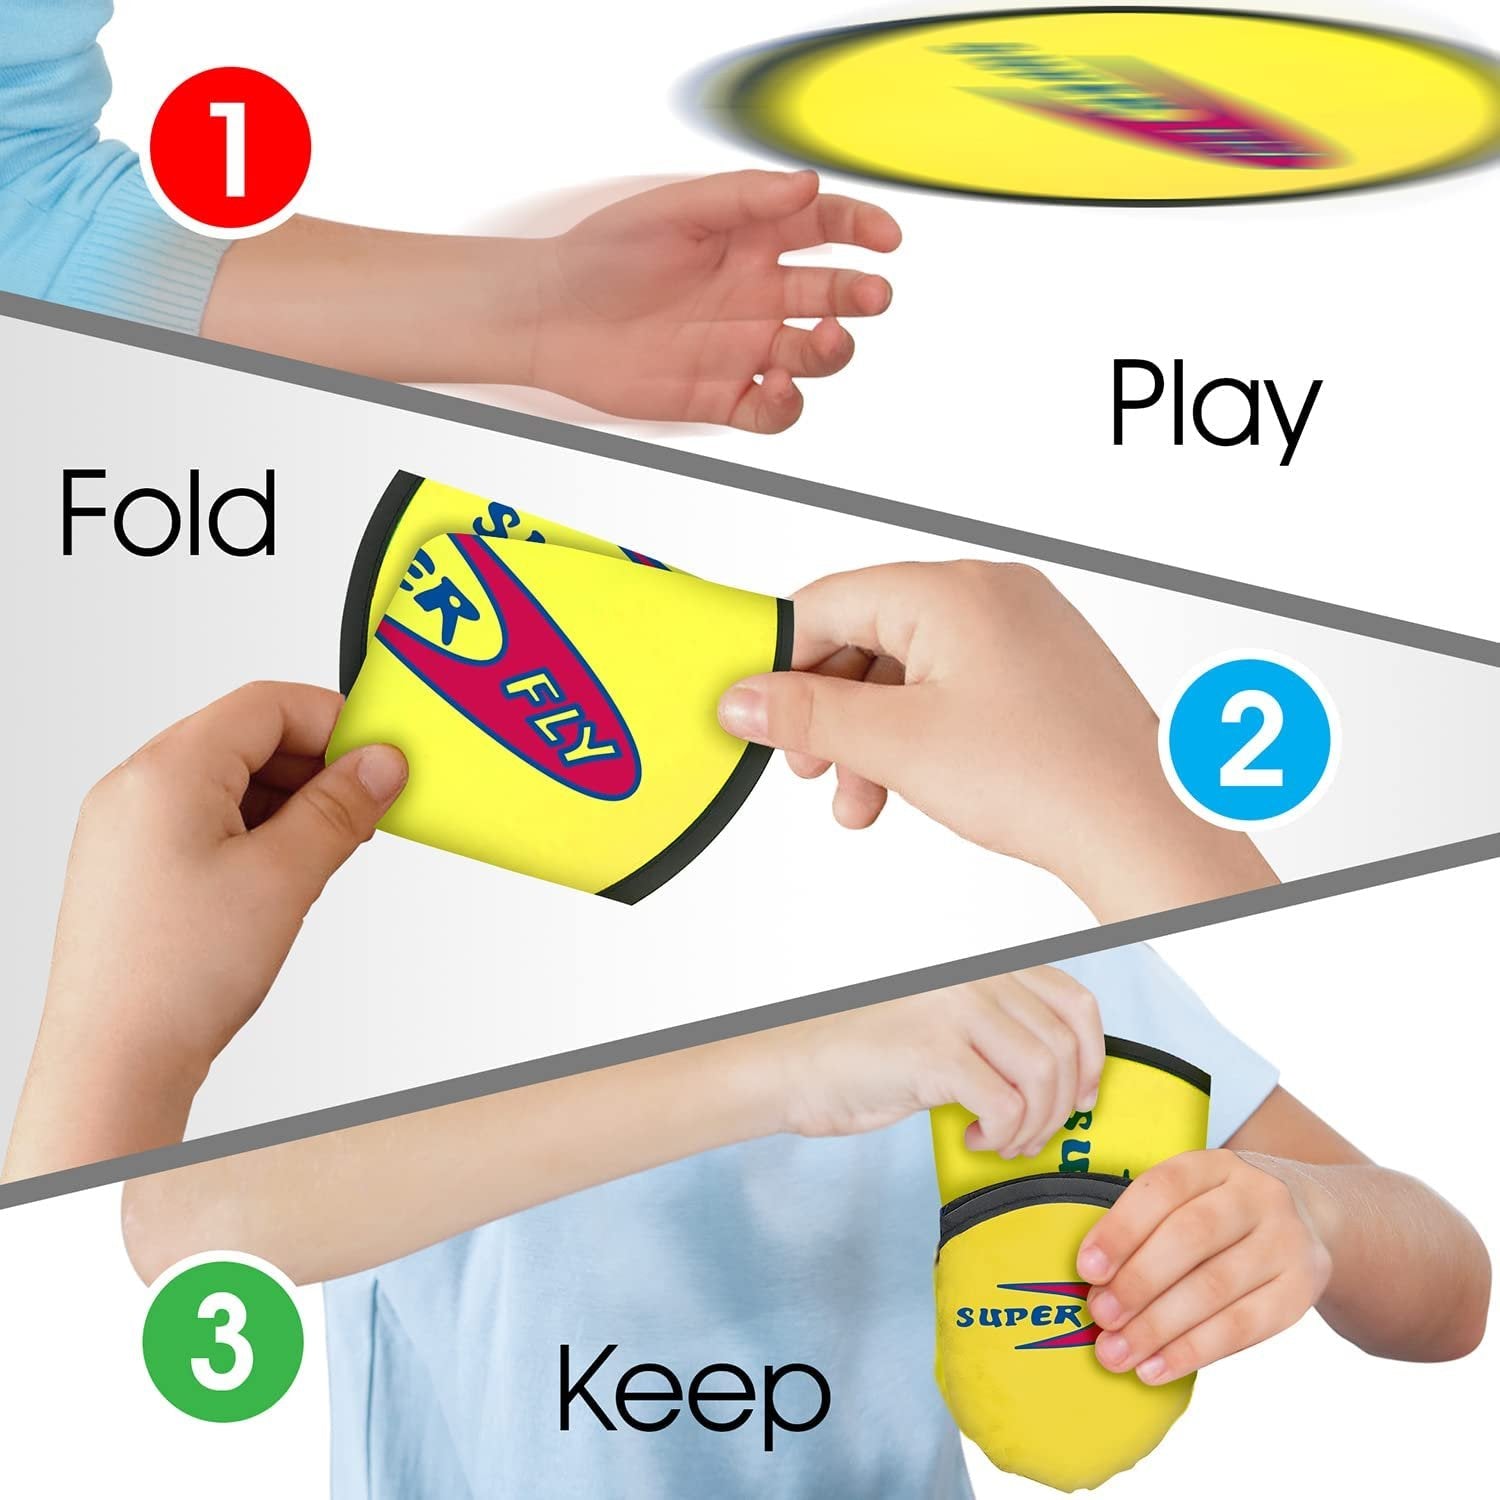 Folding Pocket Frisbee Set - 12 Pack - Foldable Frisbees for Kids and Adults - Colorful Flying Disc Toys - Fun Birthday Party Favors for Boys and Girls - Summer Outdoor Activity Game